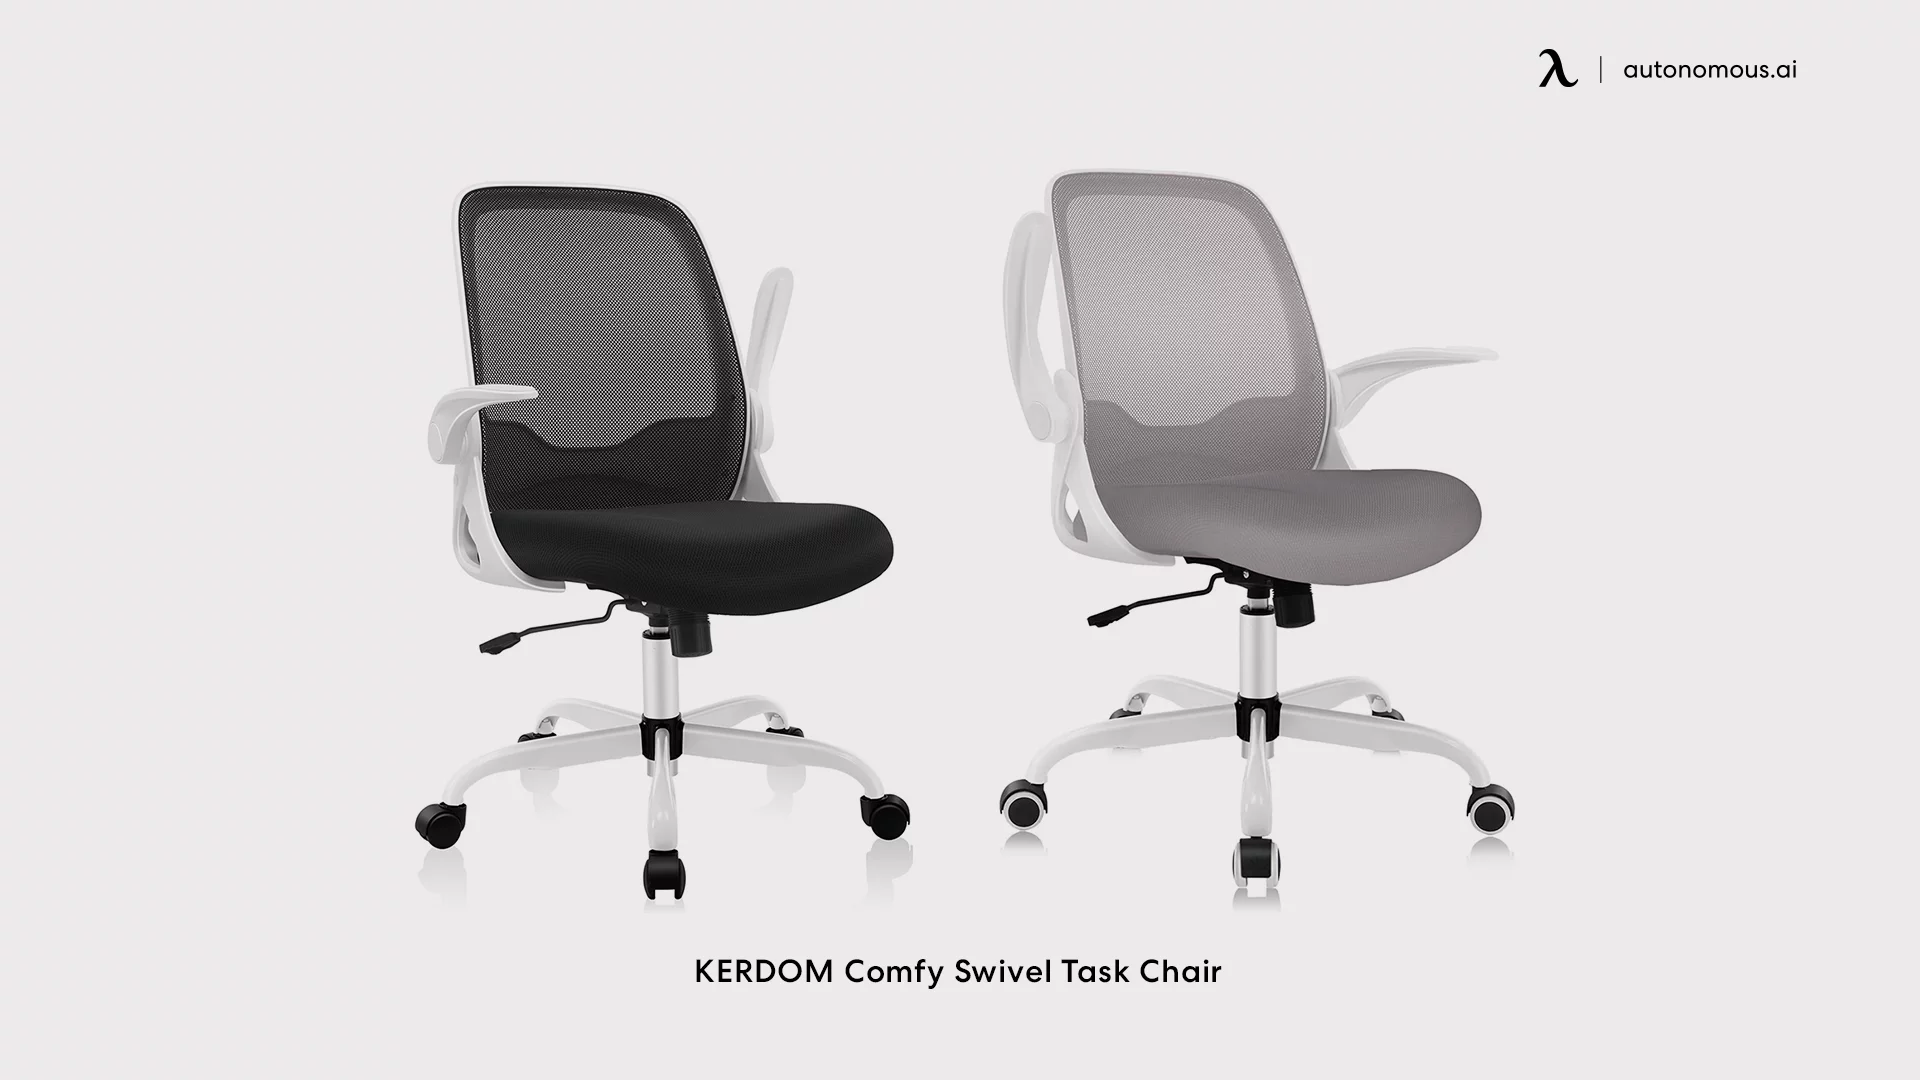 KERDOM Comfy Swivel fabric executive office chair